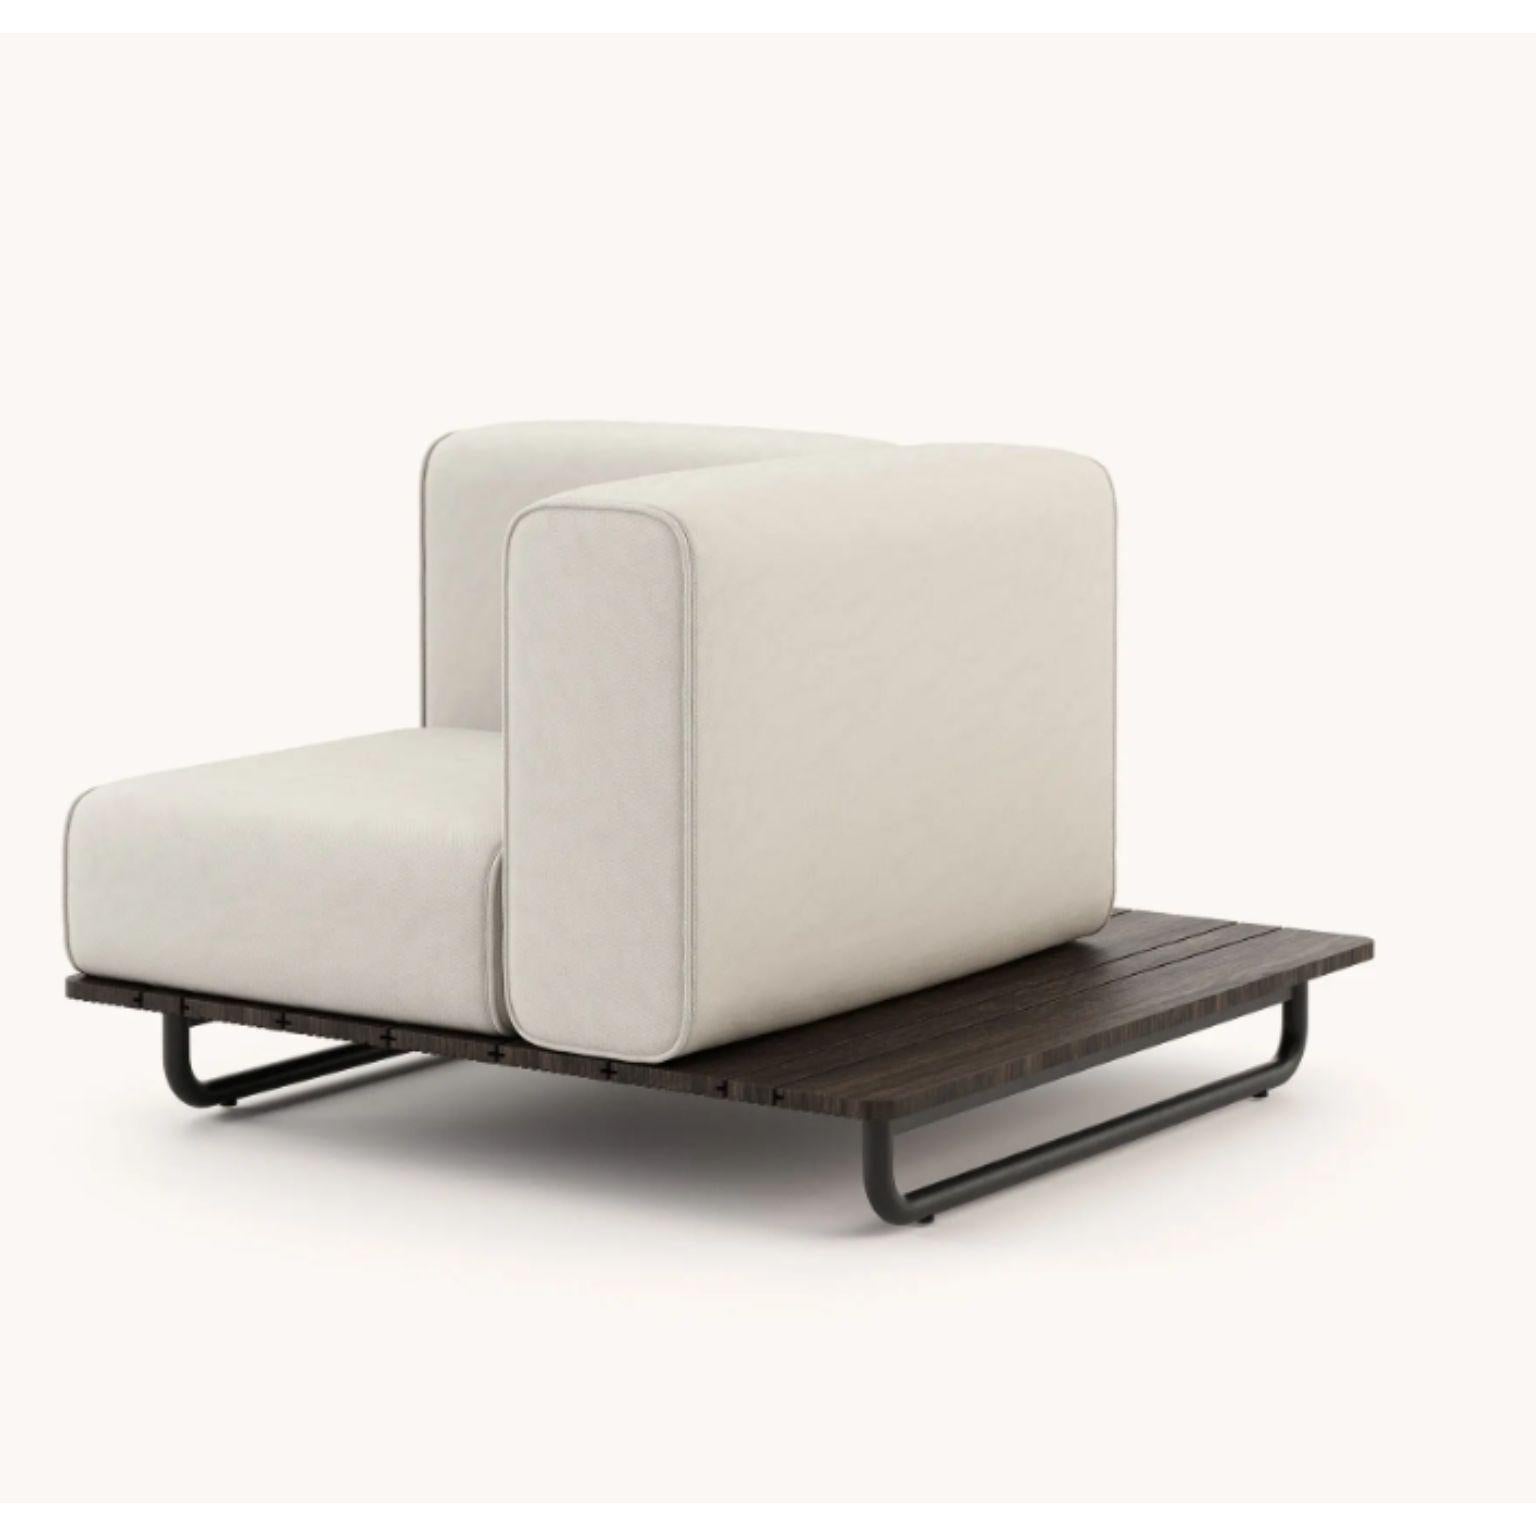 Copacabana armchair left by Domkapa
Materials: black texturized steel, bamboo wood, fabric (Rhine Ice).
Dimensions: W 105 x D 105 x H 75 cm.
Also available in different materials. 

The steel structure won’t oxidize, colors are treated to